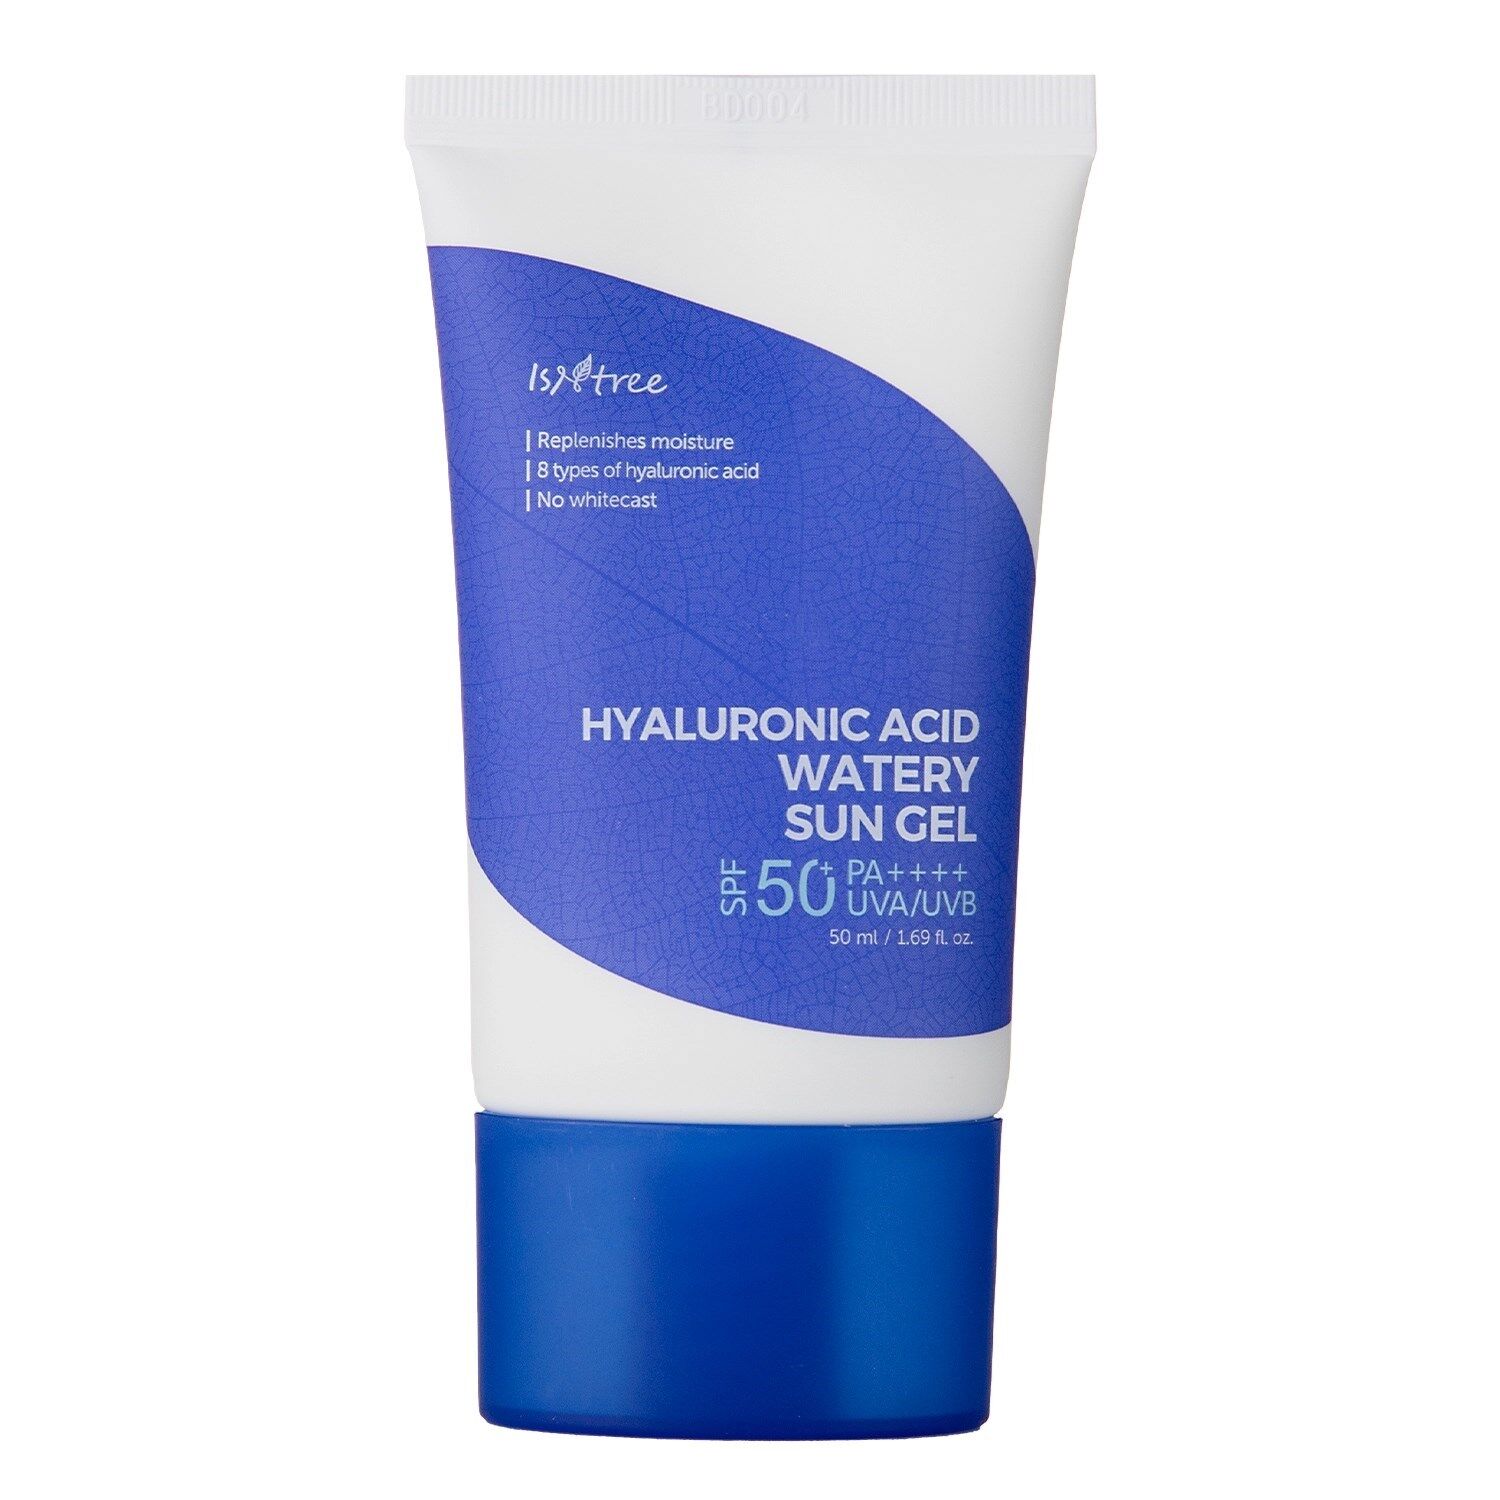 ISNtree Hyaluronic Acid Watery Sun Gel - for All Skin Types 50mL SPF50+